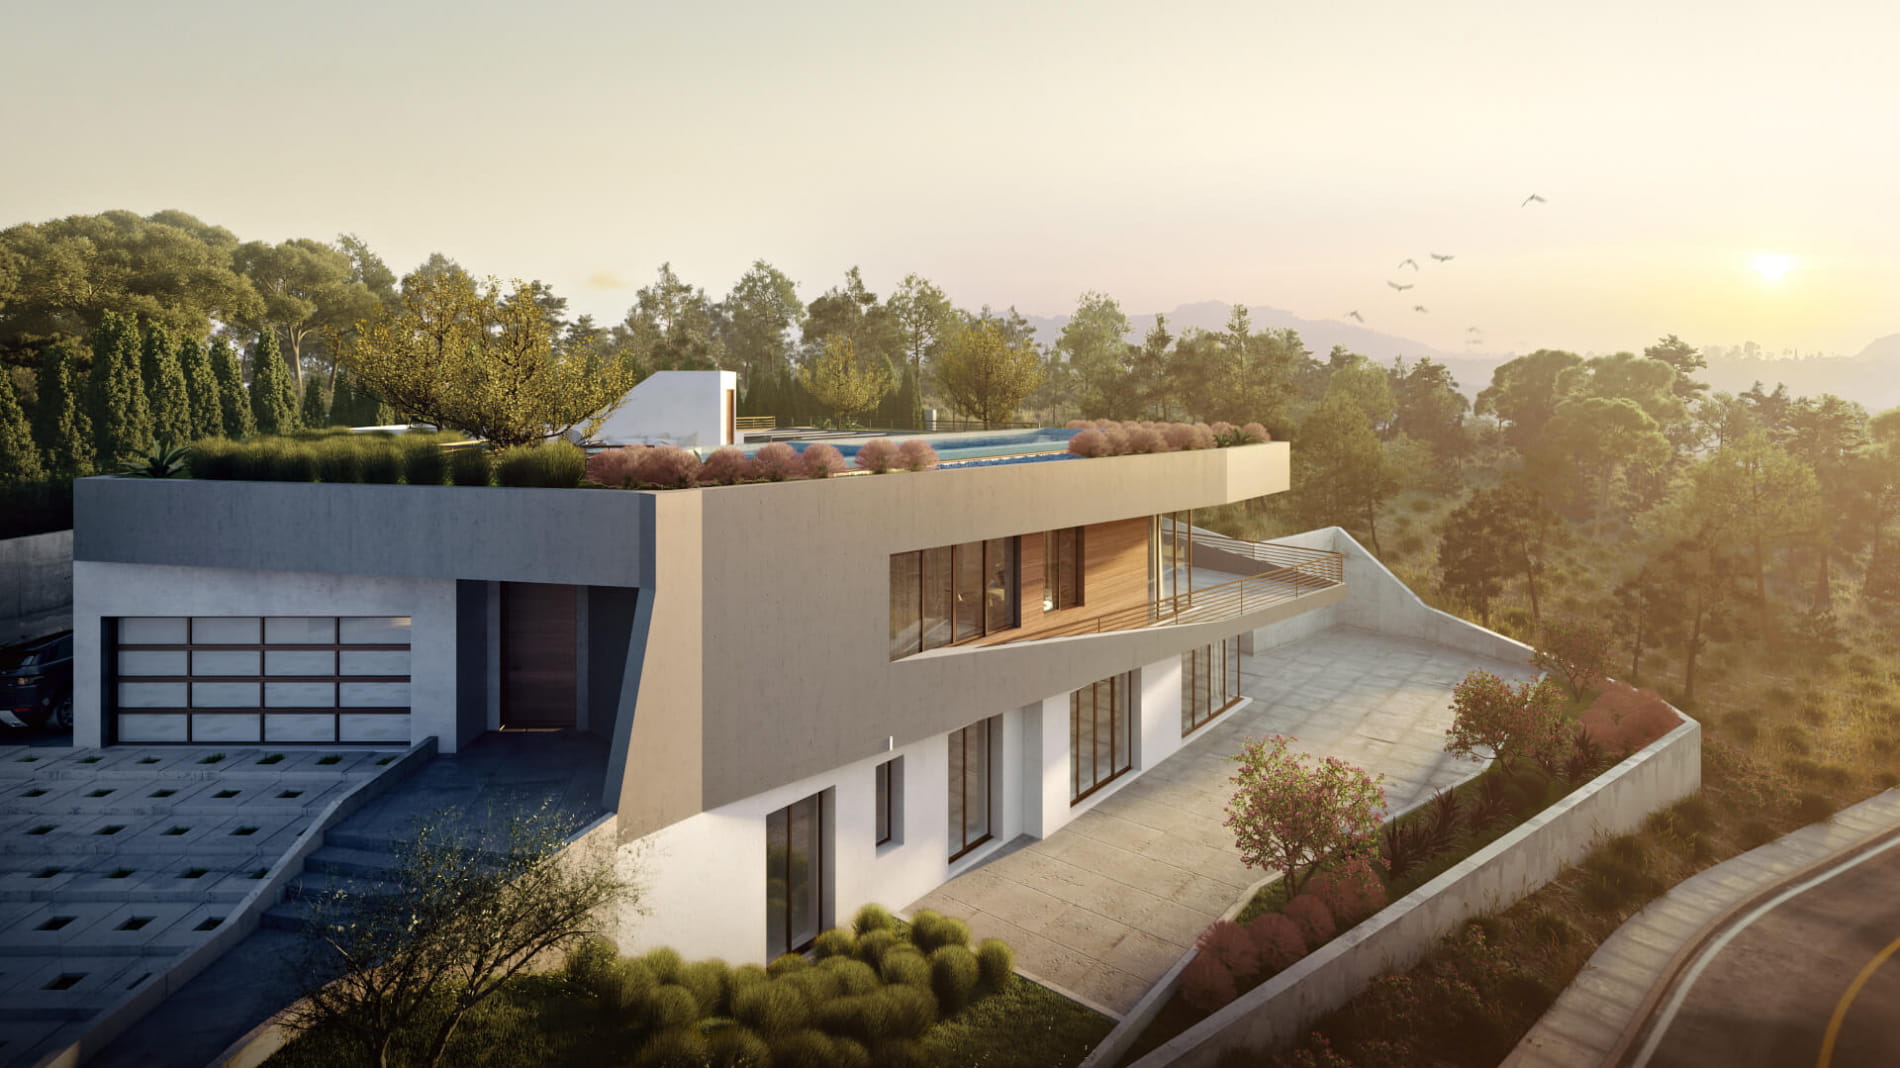 3d-exterior-architectural-rendering-for-a-dazzling-house-design-by-archicgi